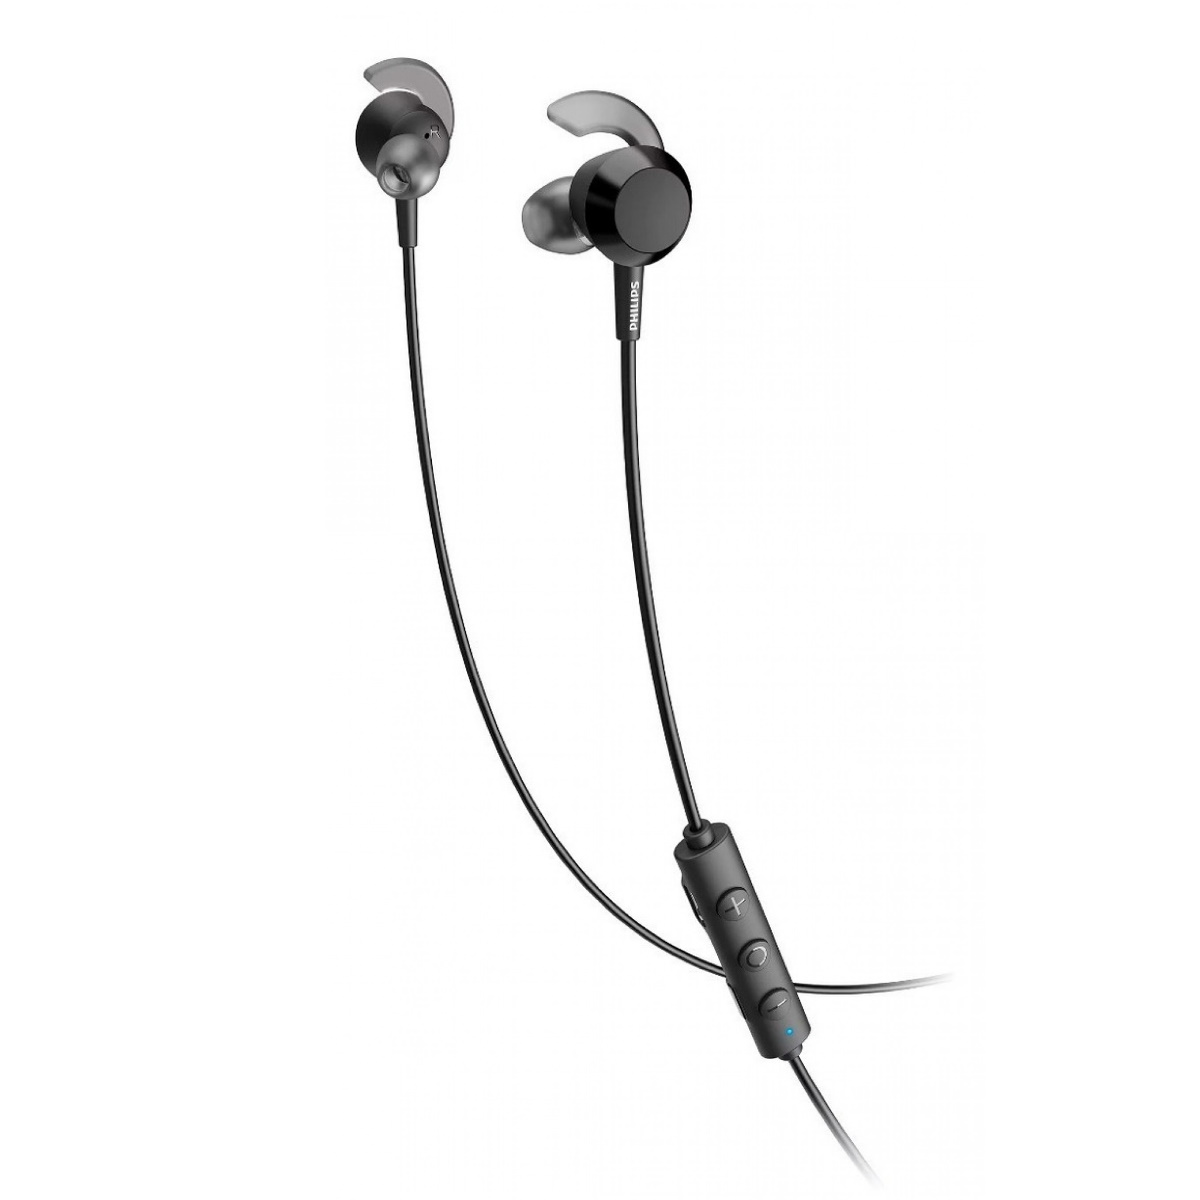 Philips Auriculares intrauditivos con cable - Negro